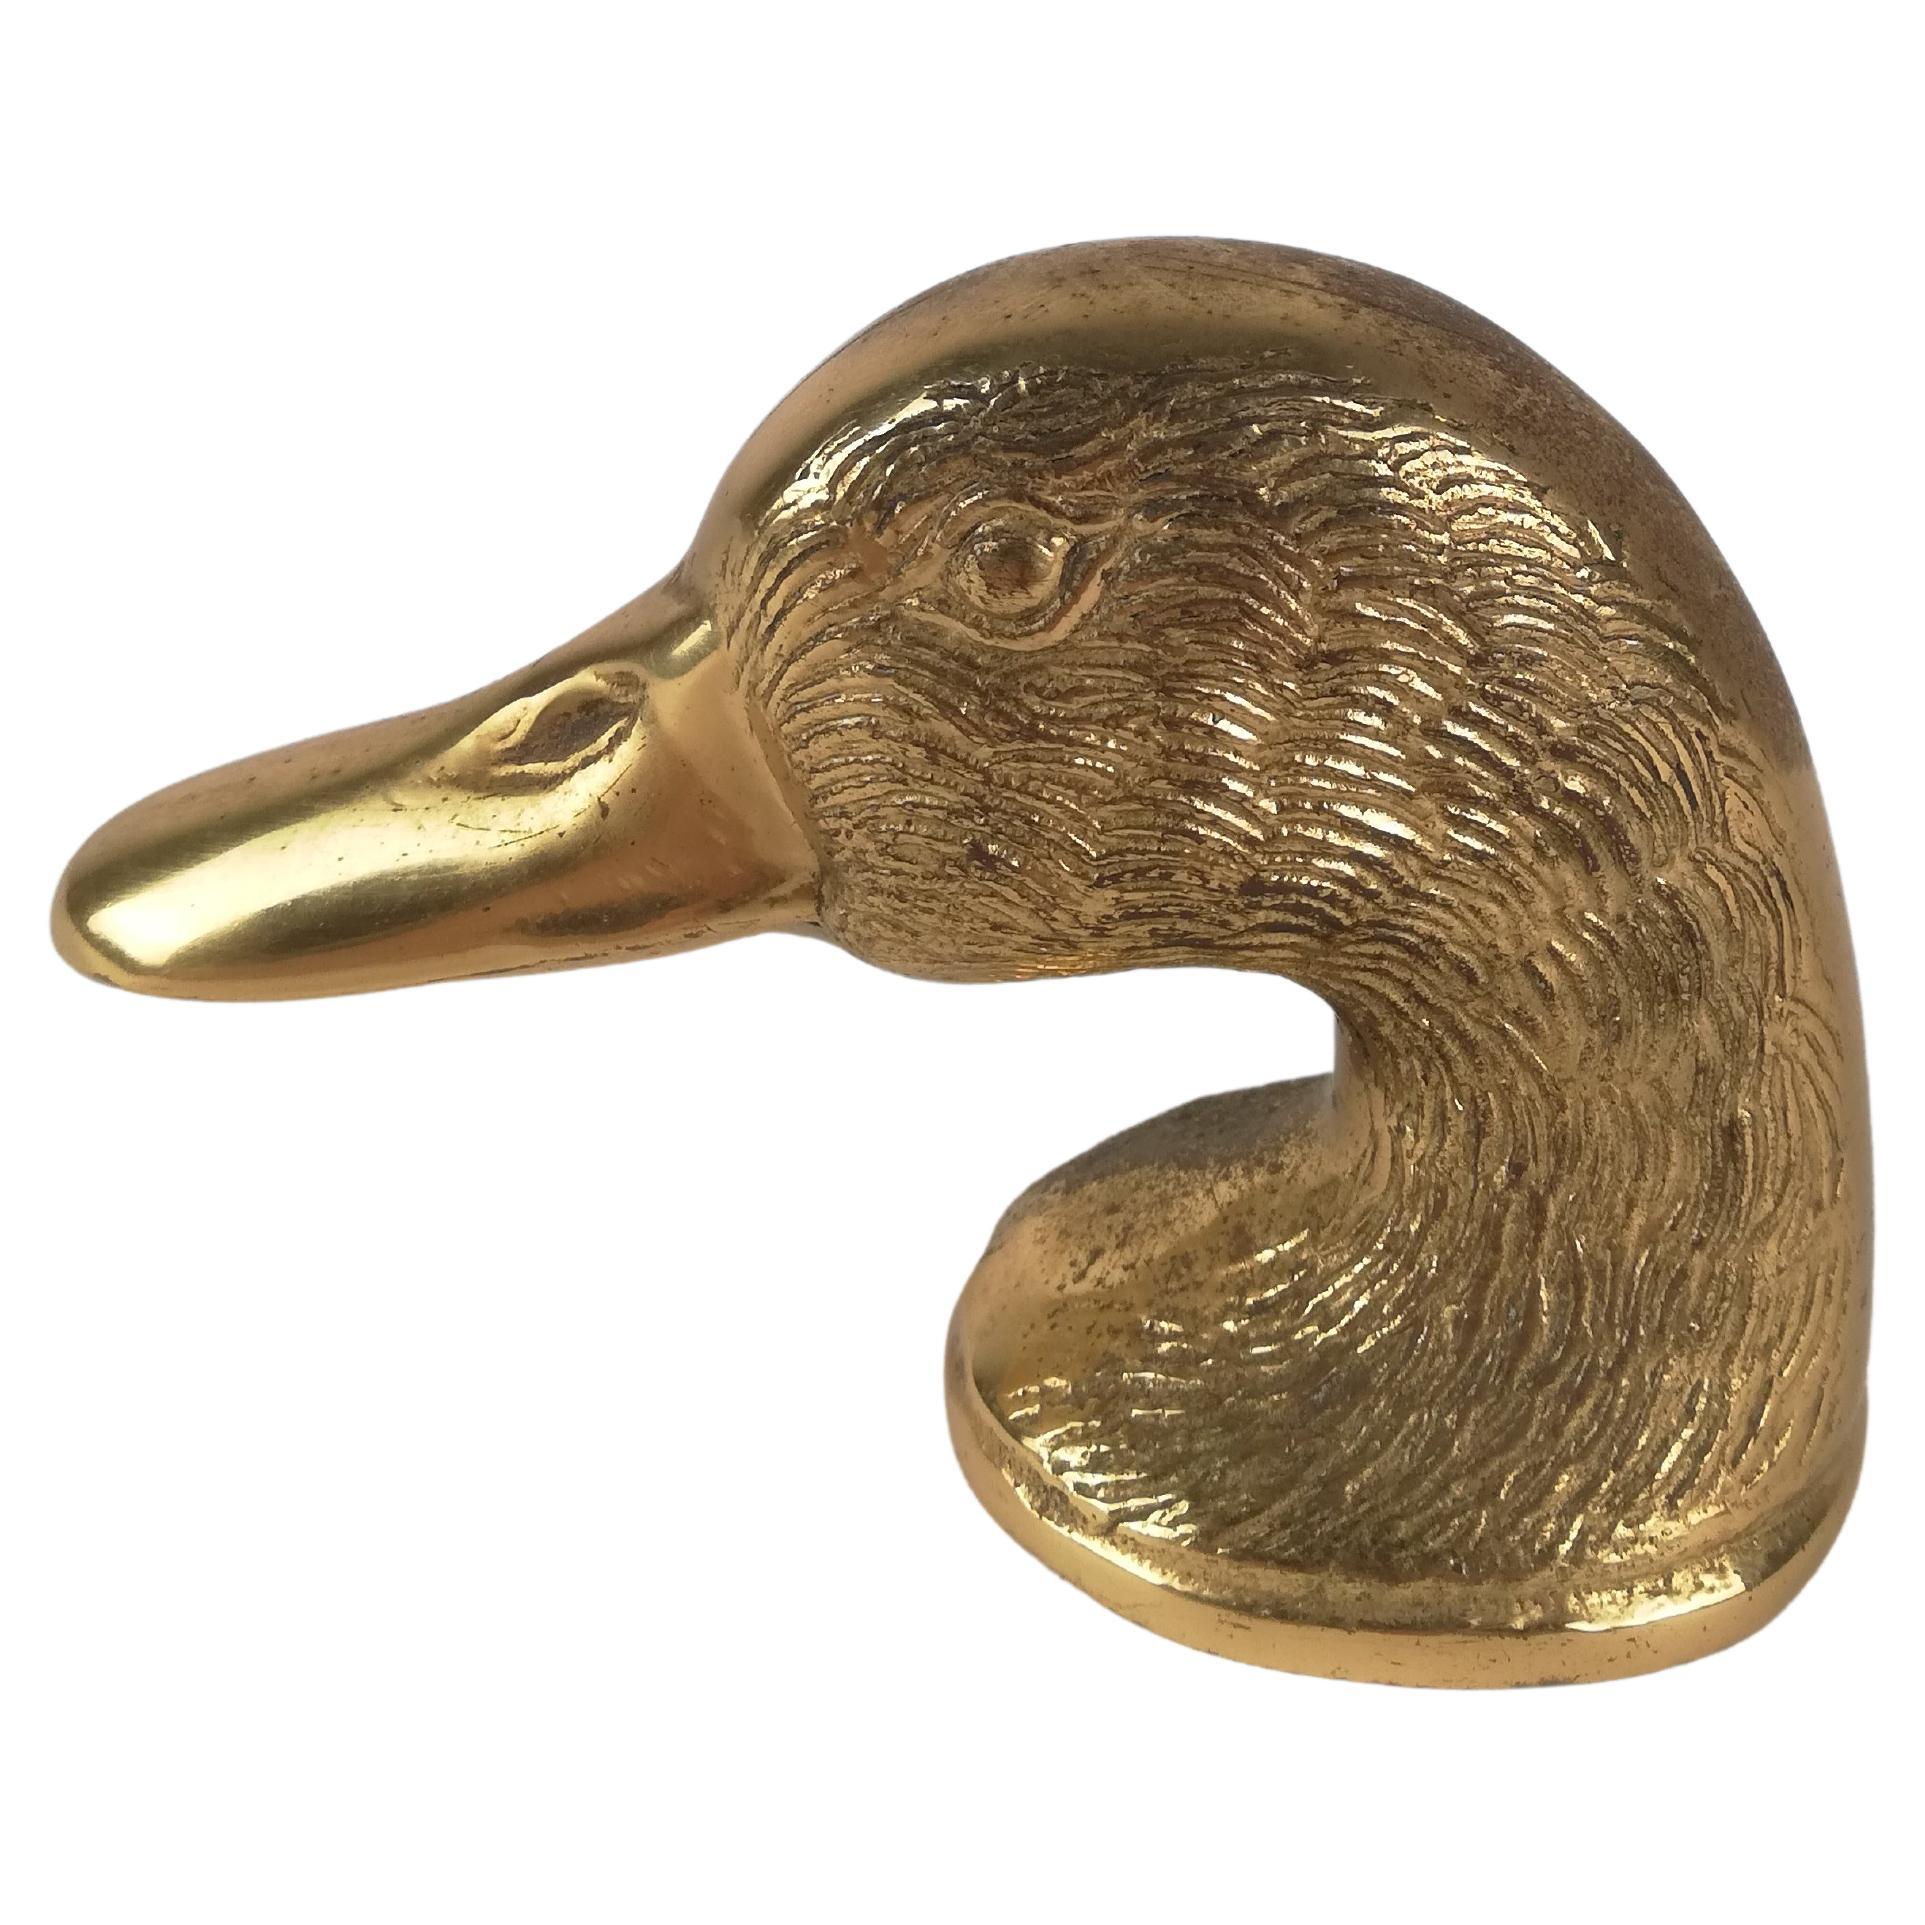 https://a.1stdibscdn.com/vintage-animals-head-bottle-opener-in-the-style-of-gucci-brass-sculptural-duck-for-sale/f_78682/f_332656621678741739808/f_33265662_1678741740560_bg_processed.jpg